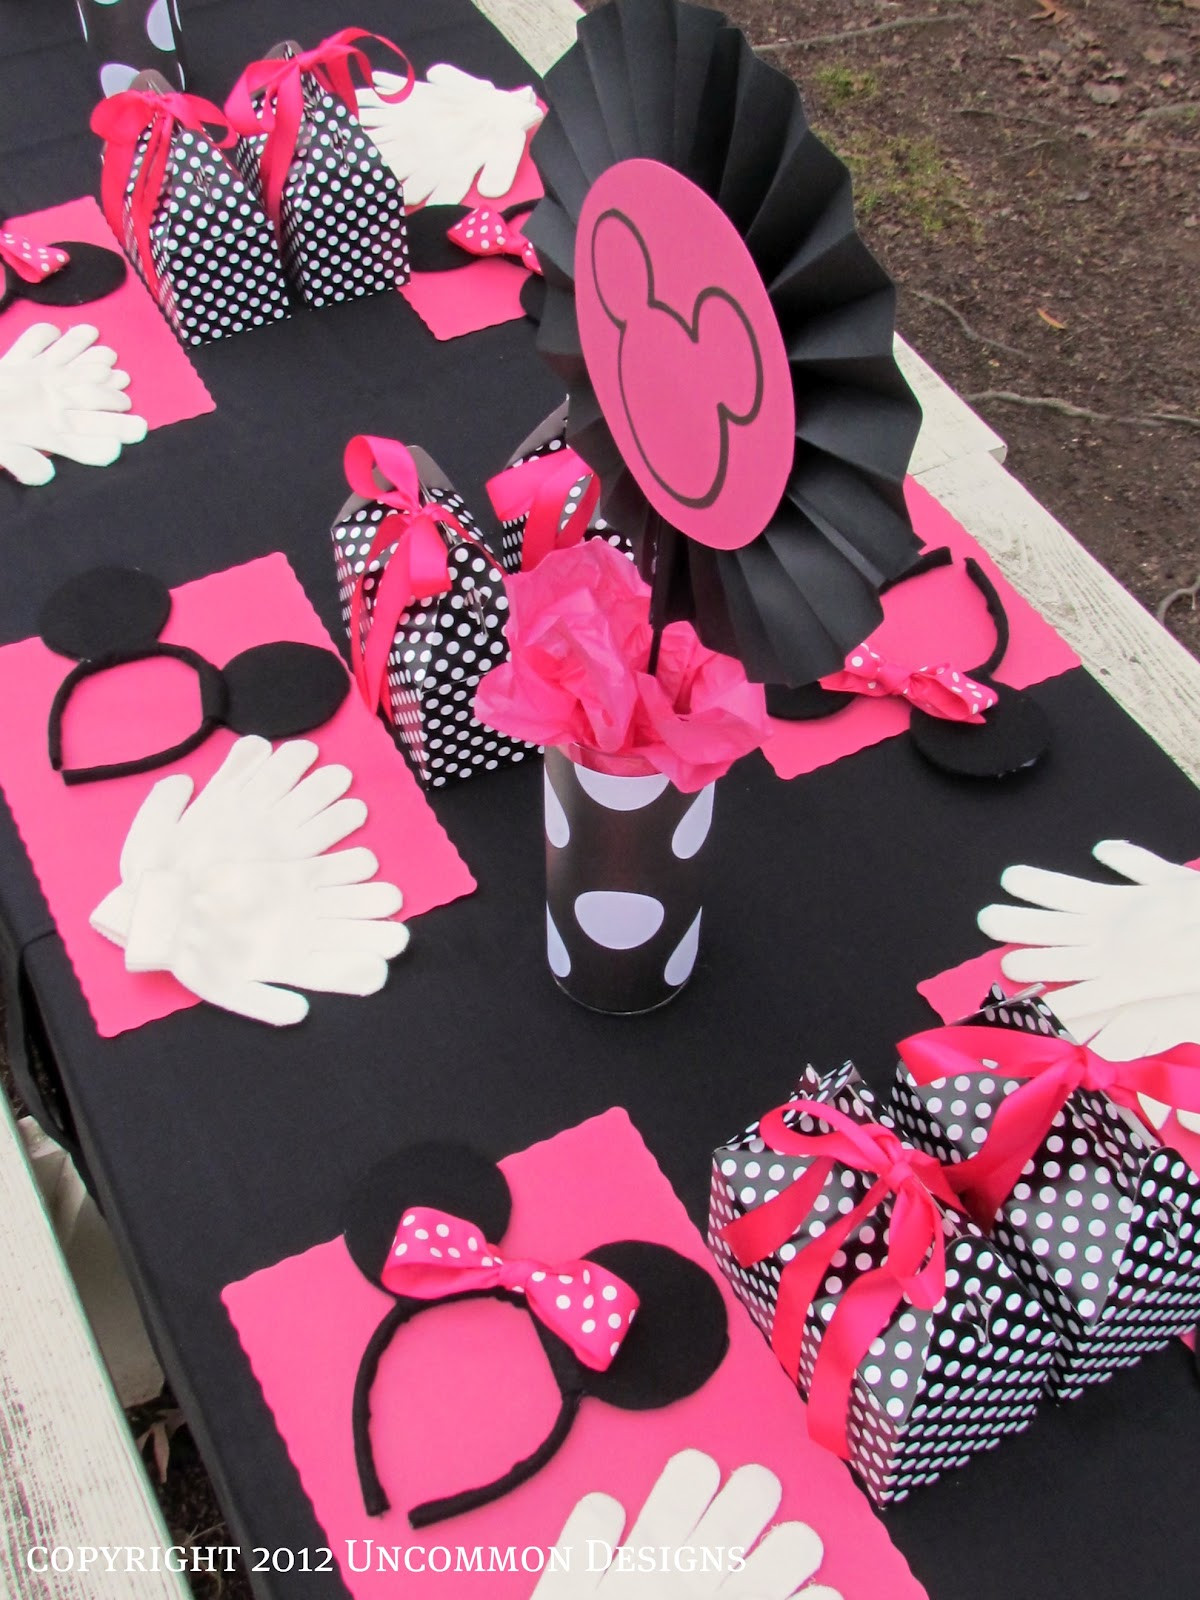 Minnie Mouse Birthday Party Decorations
 A Minnie Mouse Birthday Party Un mon Designs